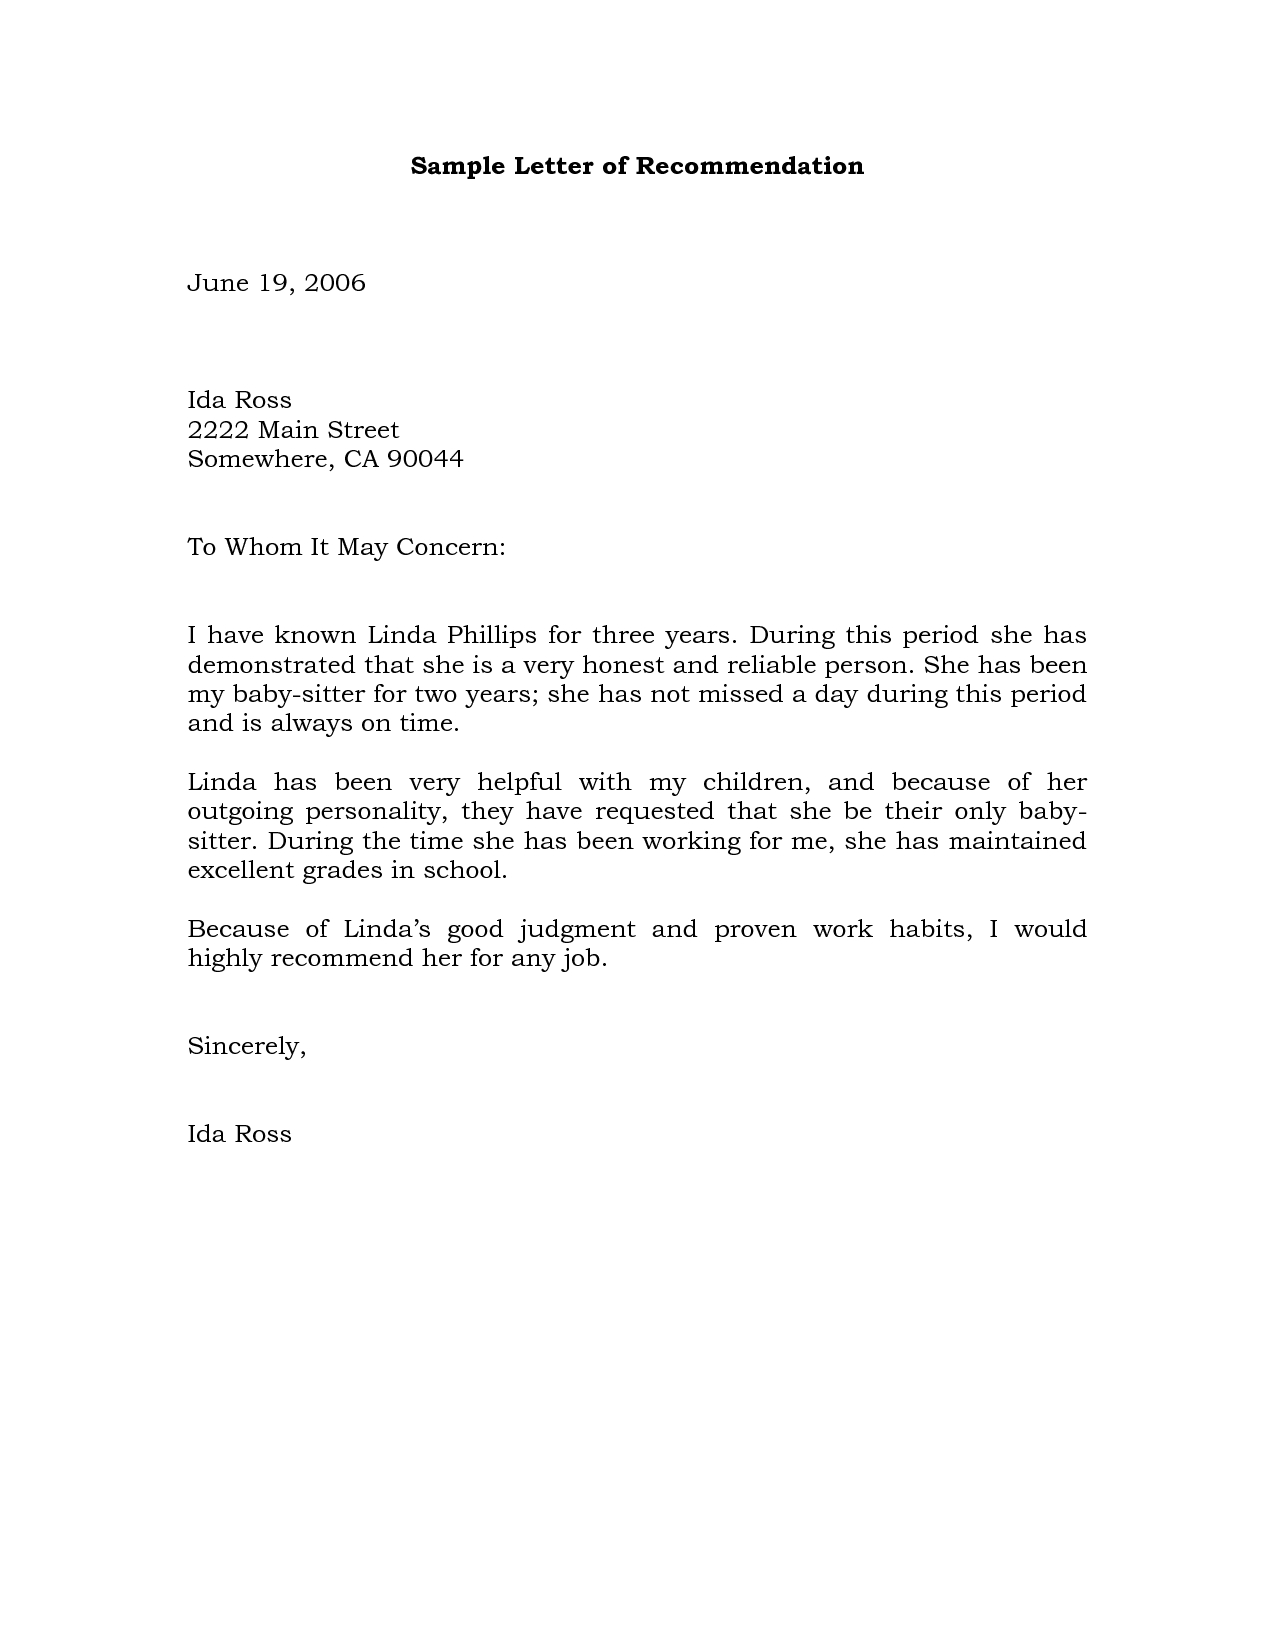 Company Business Reference Letter Template - Sample Re Mendation Letter Example Projects to Try